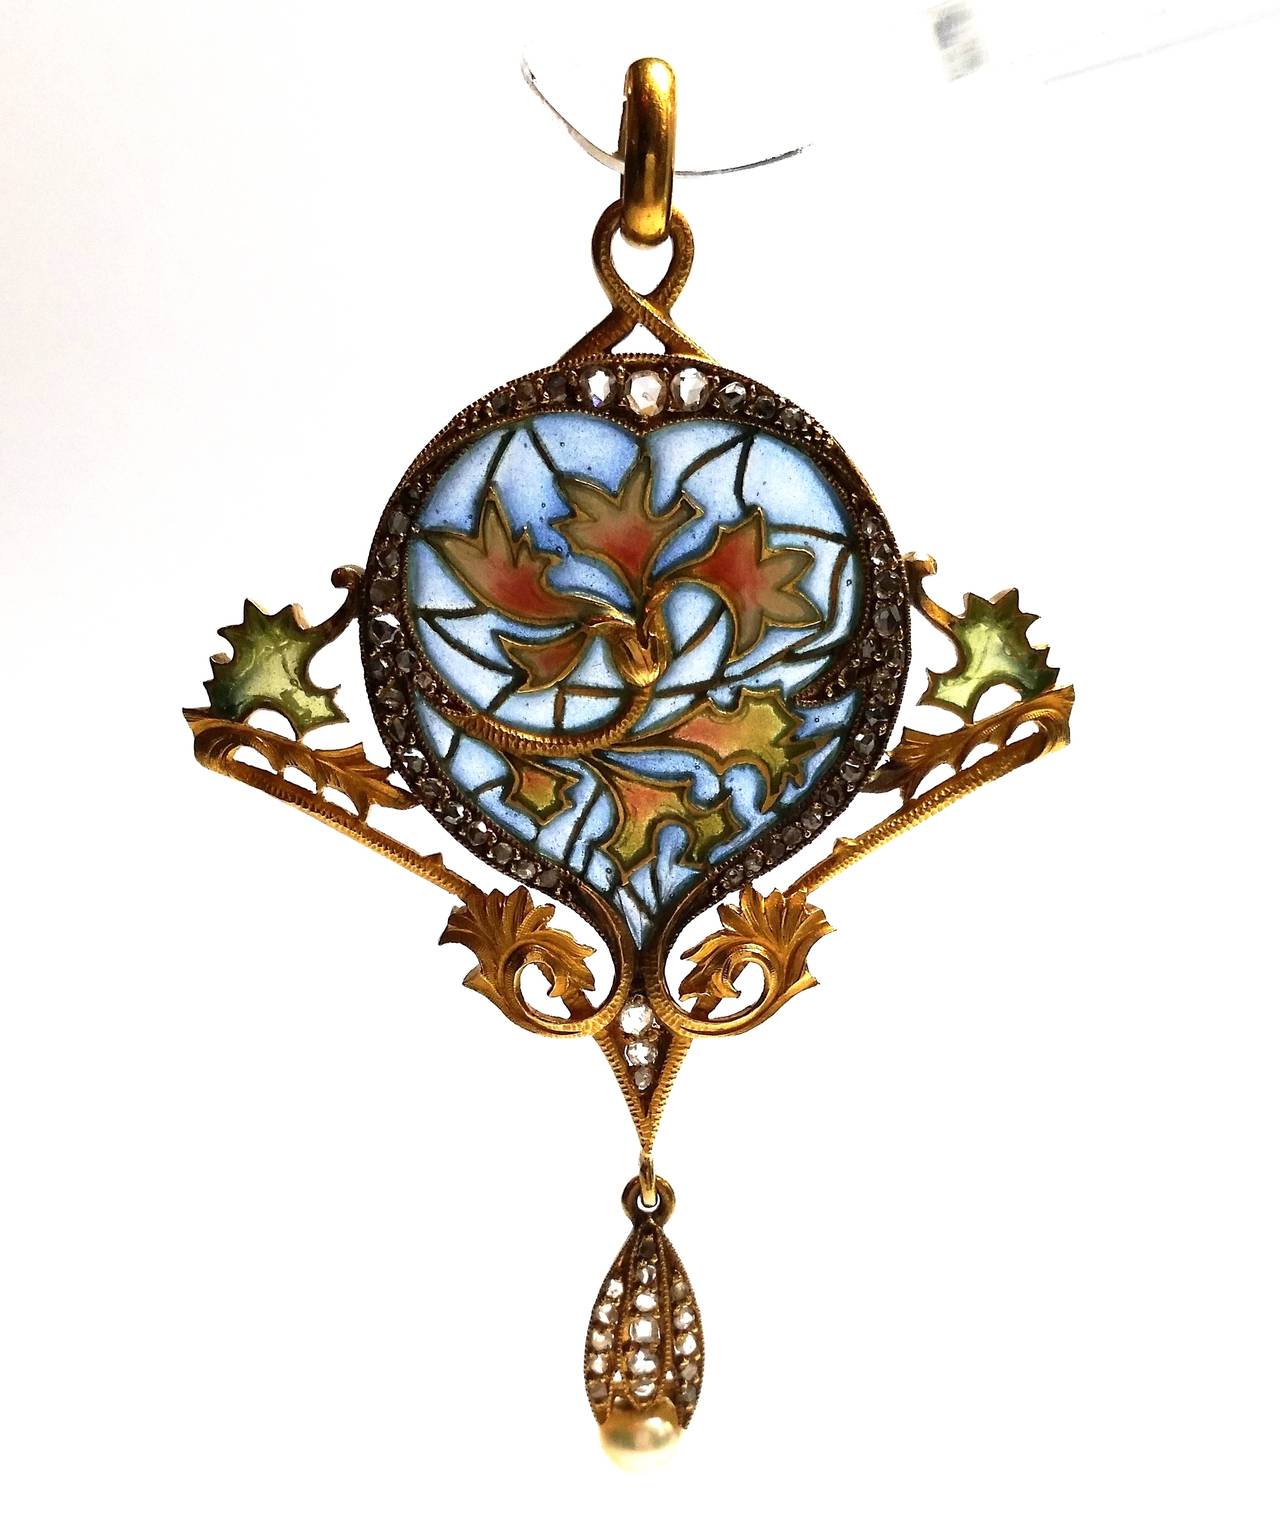 Beautiful Art Nouveau pendant by jeweller Masriera.
Represents vegetal motifs in yellow gold, plique-à-jour enamel, diamonds and pearl.
Published and certificated